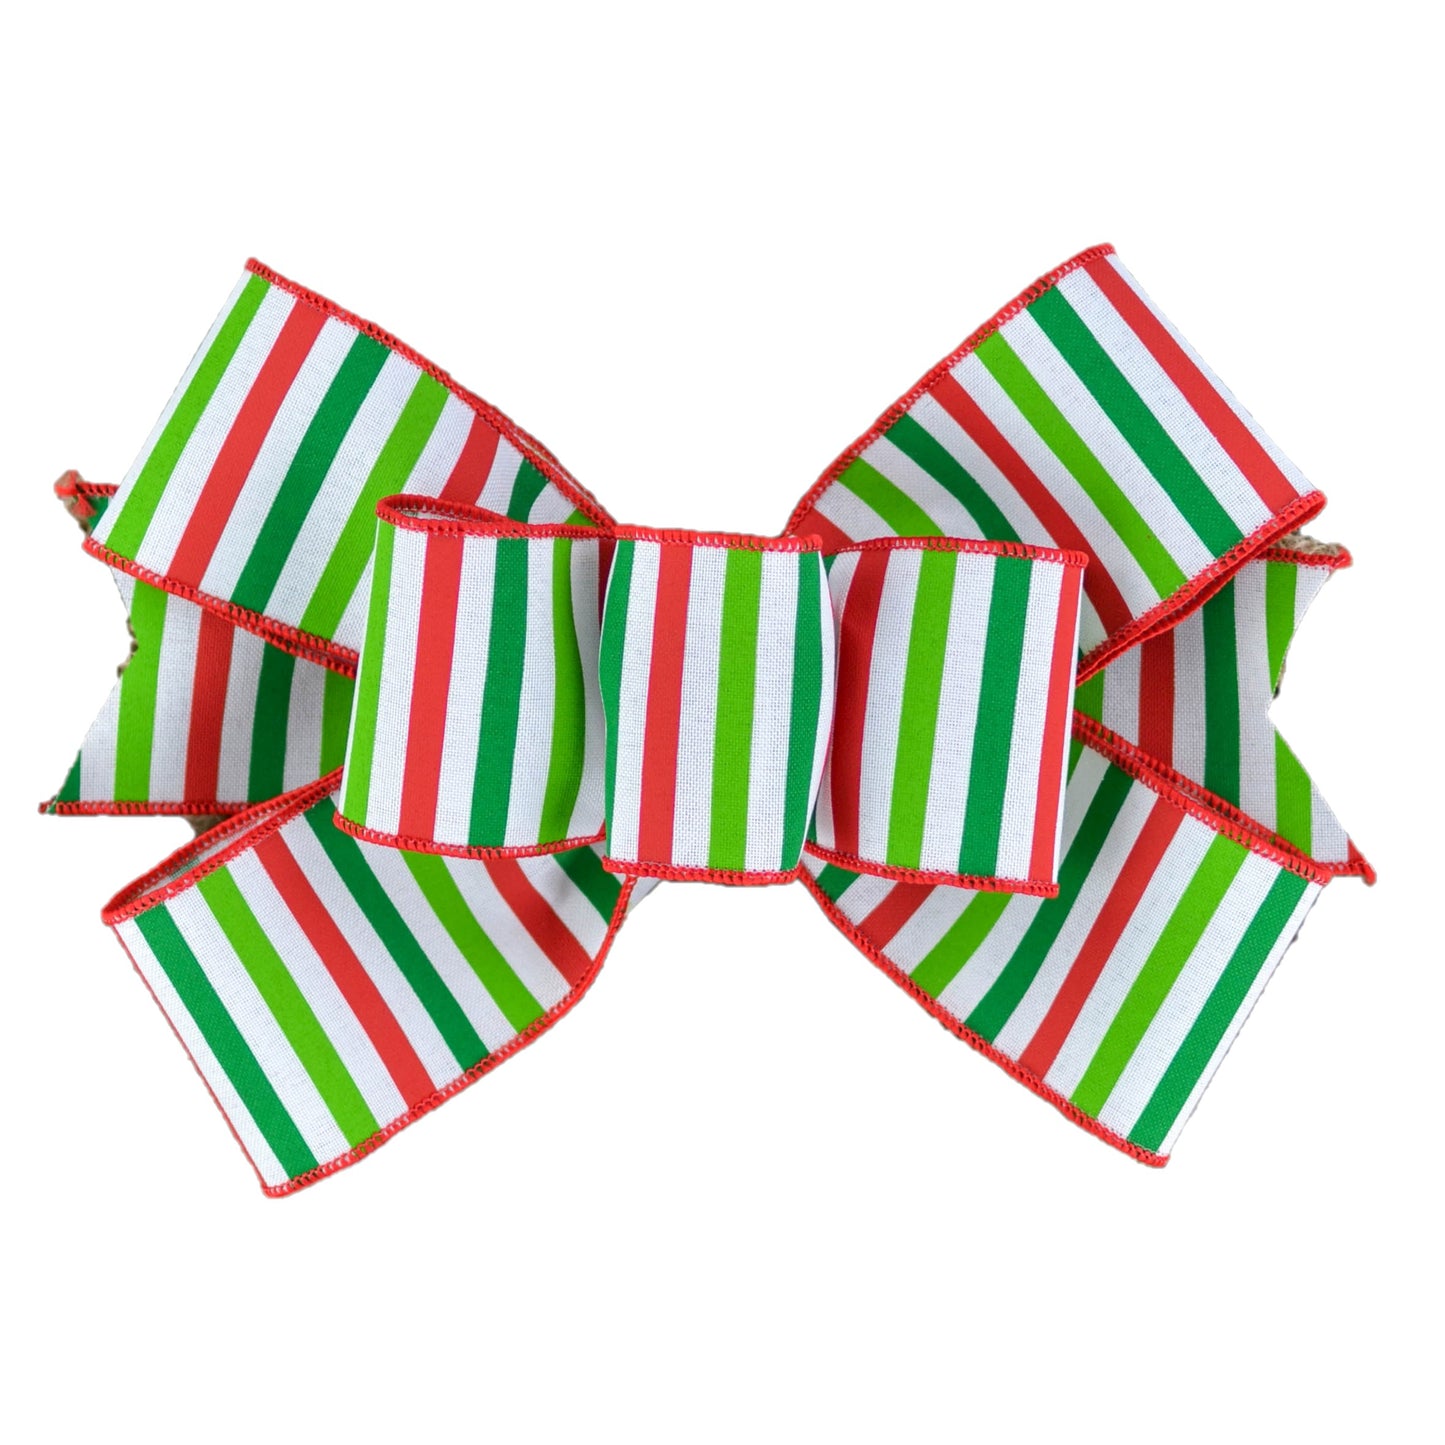 Red, Lime, White Stripe Christmas Add On Wreath Bow - Wreath Embellishment for Already Made Wreath